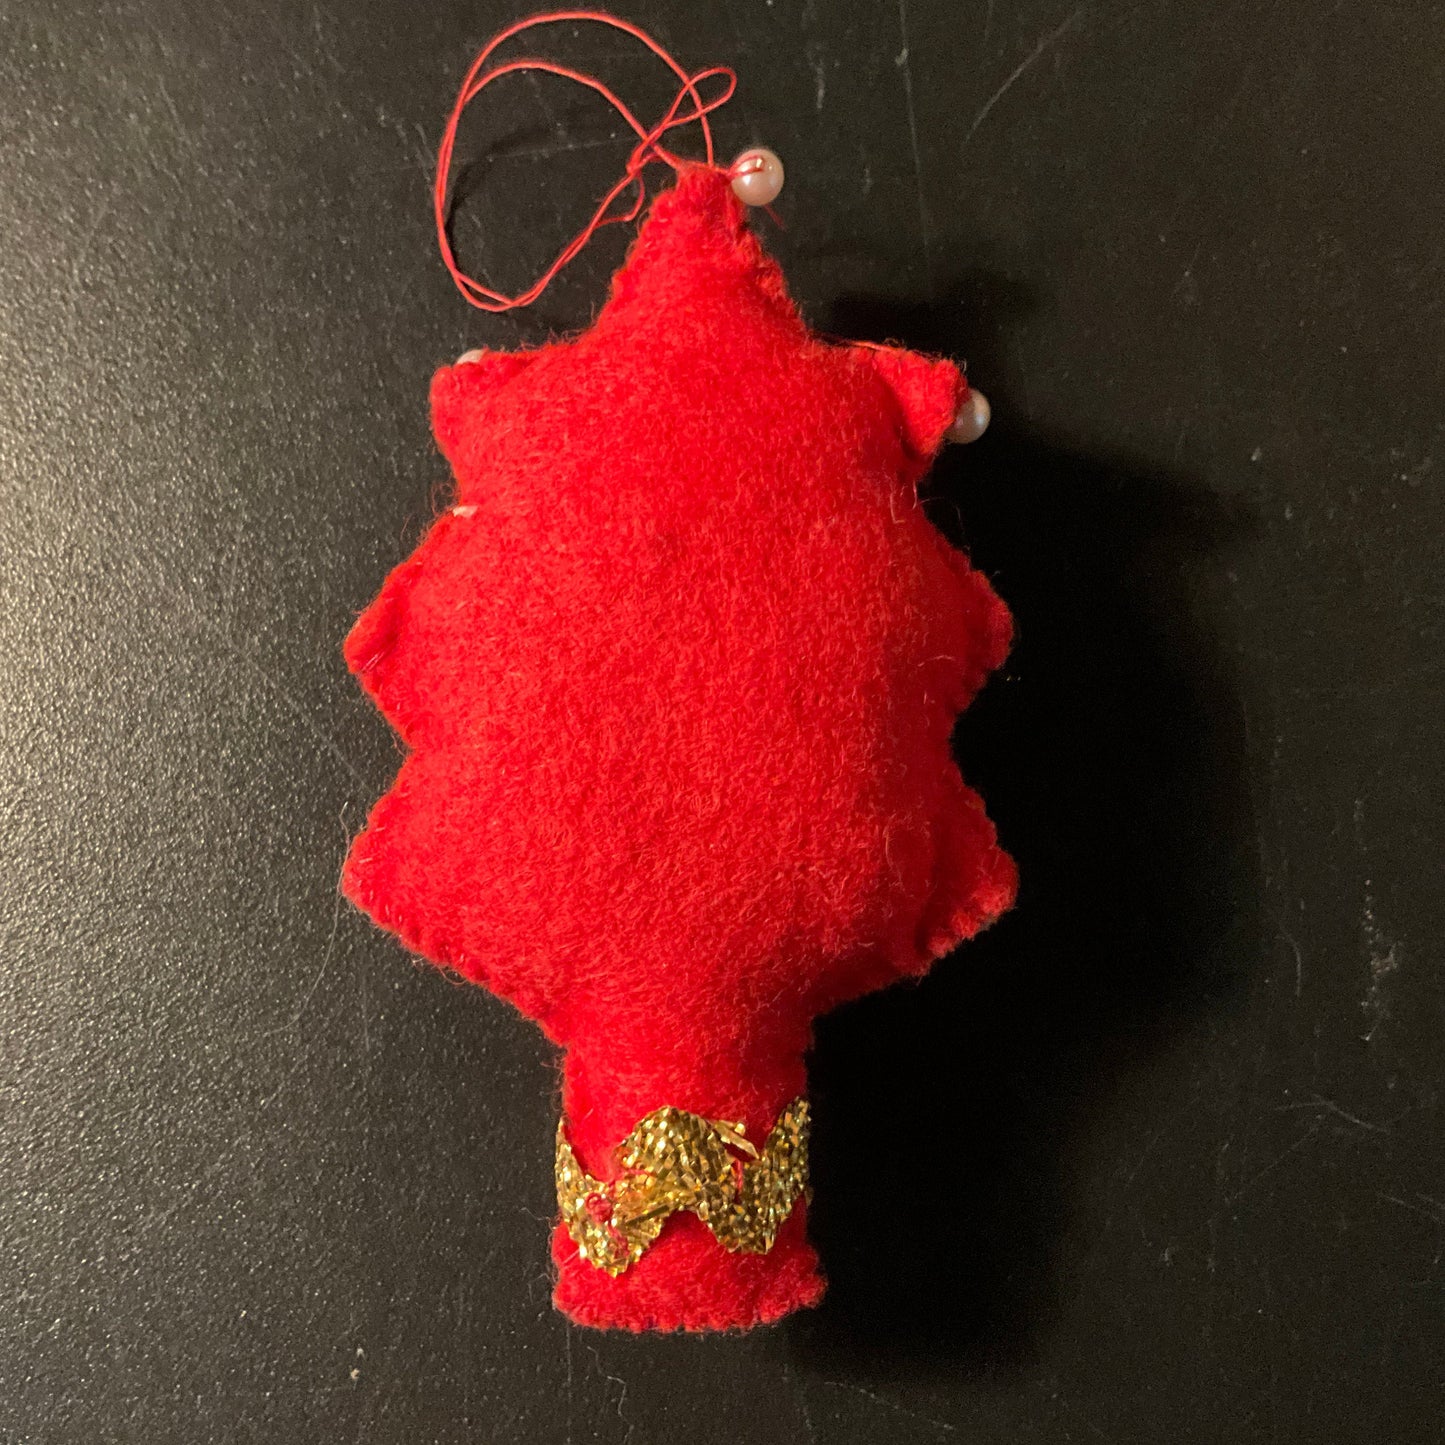 Sequins fabric & felt choice of nice vintage Christmas ornaments see pictures and variations*